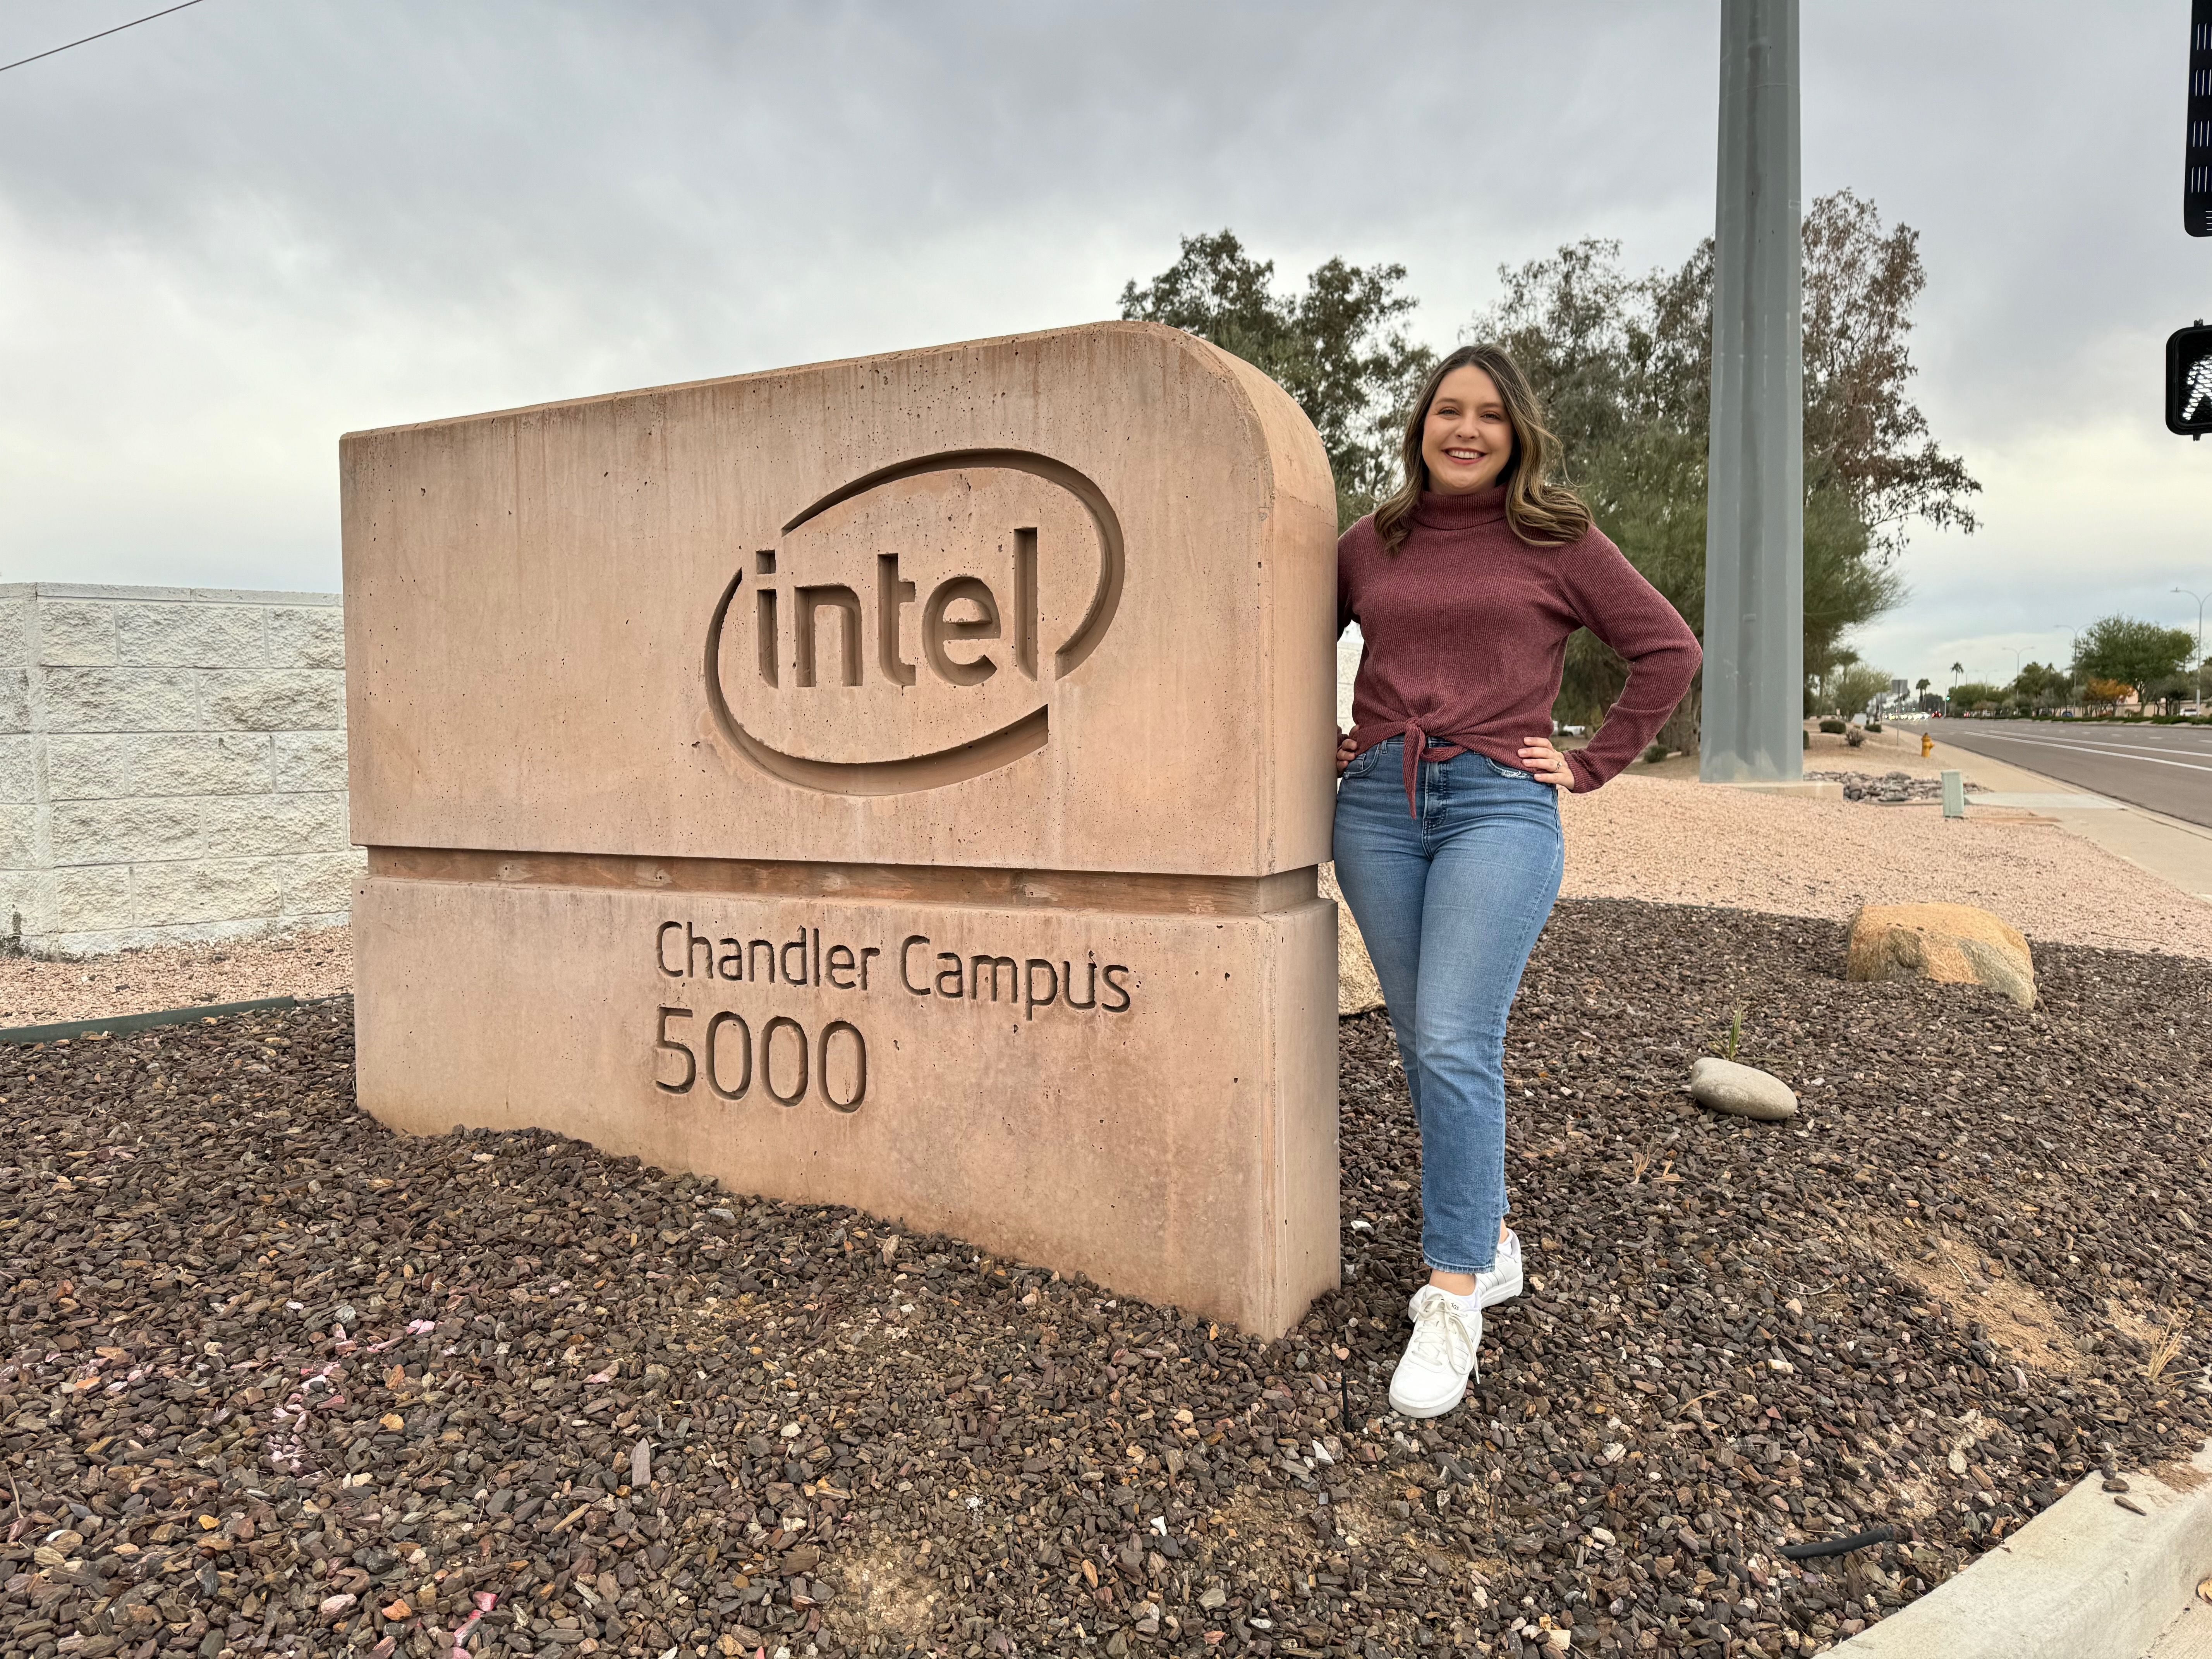 Axios Phoenix reporter Jessica Boehm stands next to a sign that says "Intel Chandler Campus"